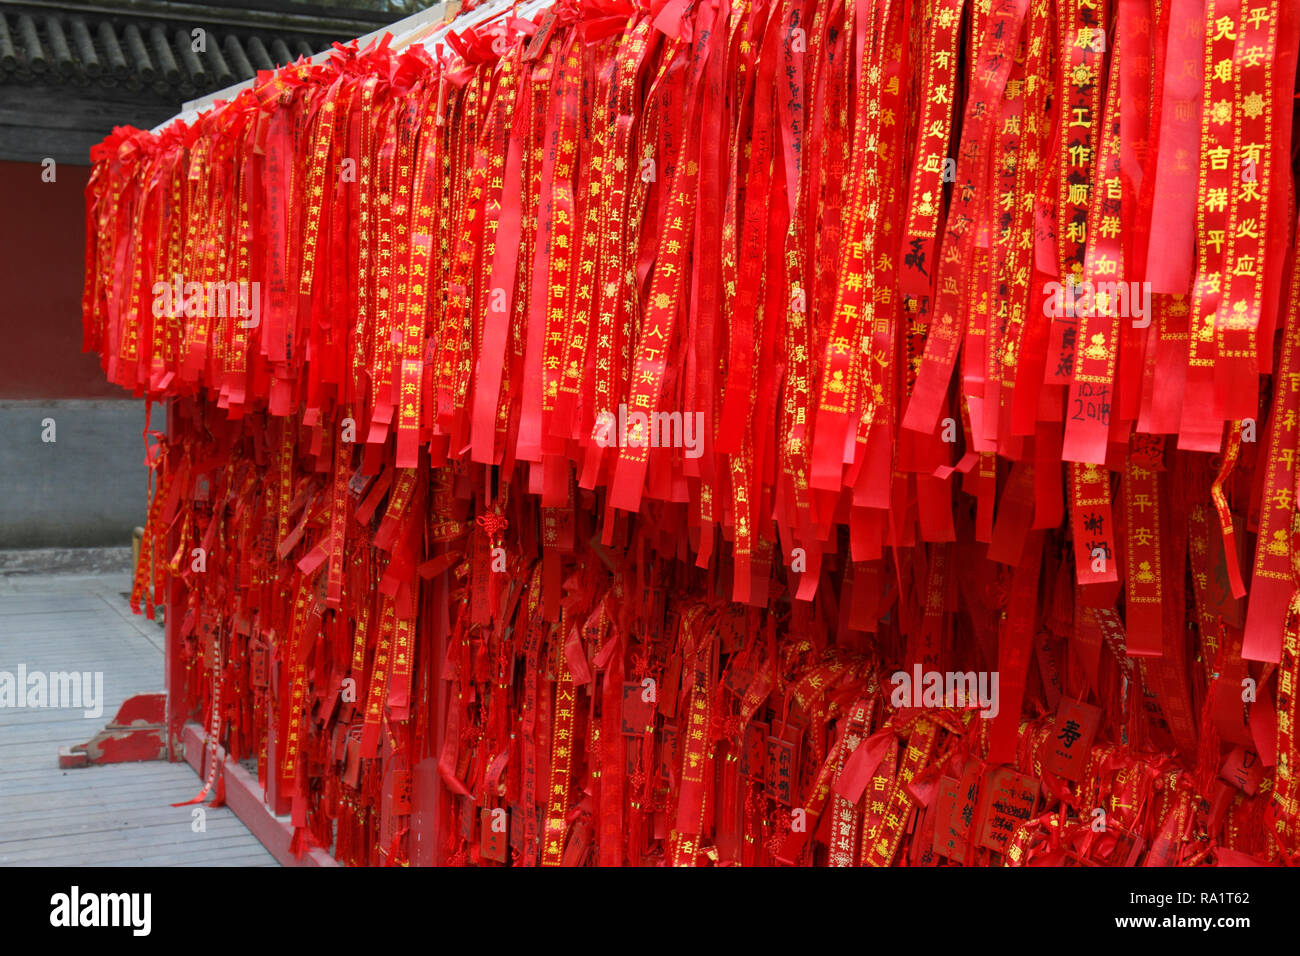 Red tassles at the summer palace Beijing China. Memories, dreams and prayers and good luck for the spirit world. Stock Photo